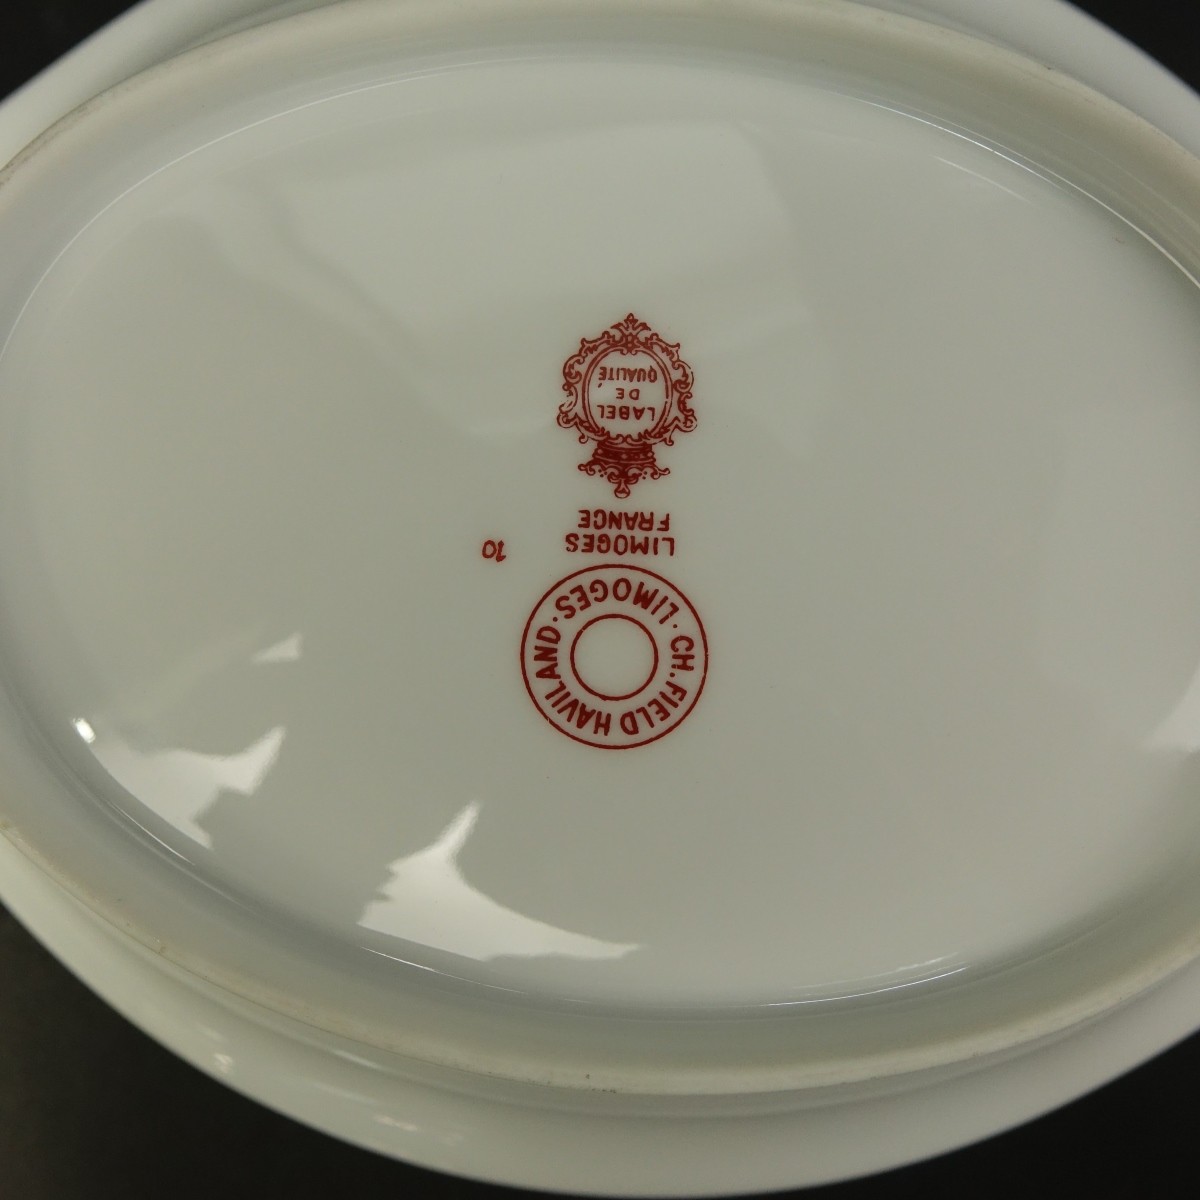 Sixty One (61) Pc. Limoges Porcelain Service